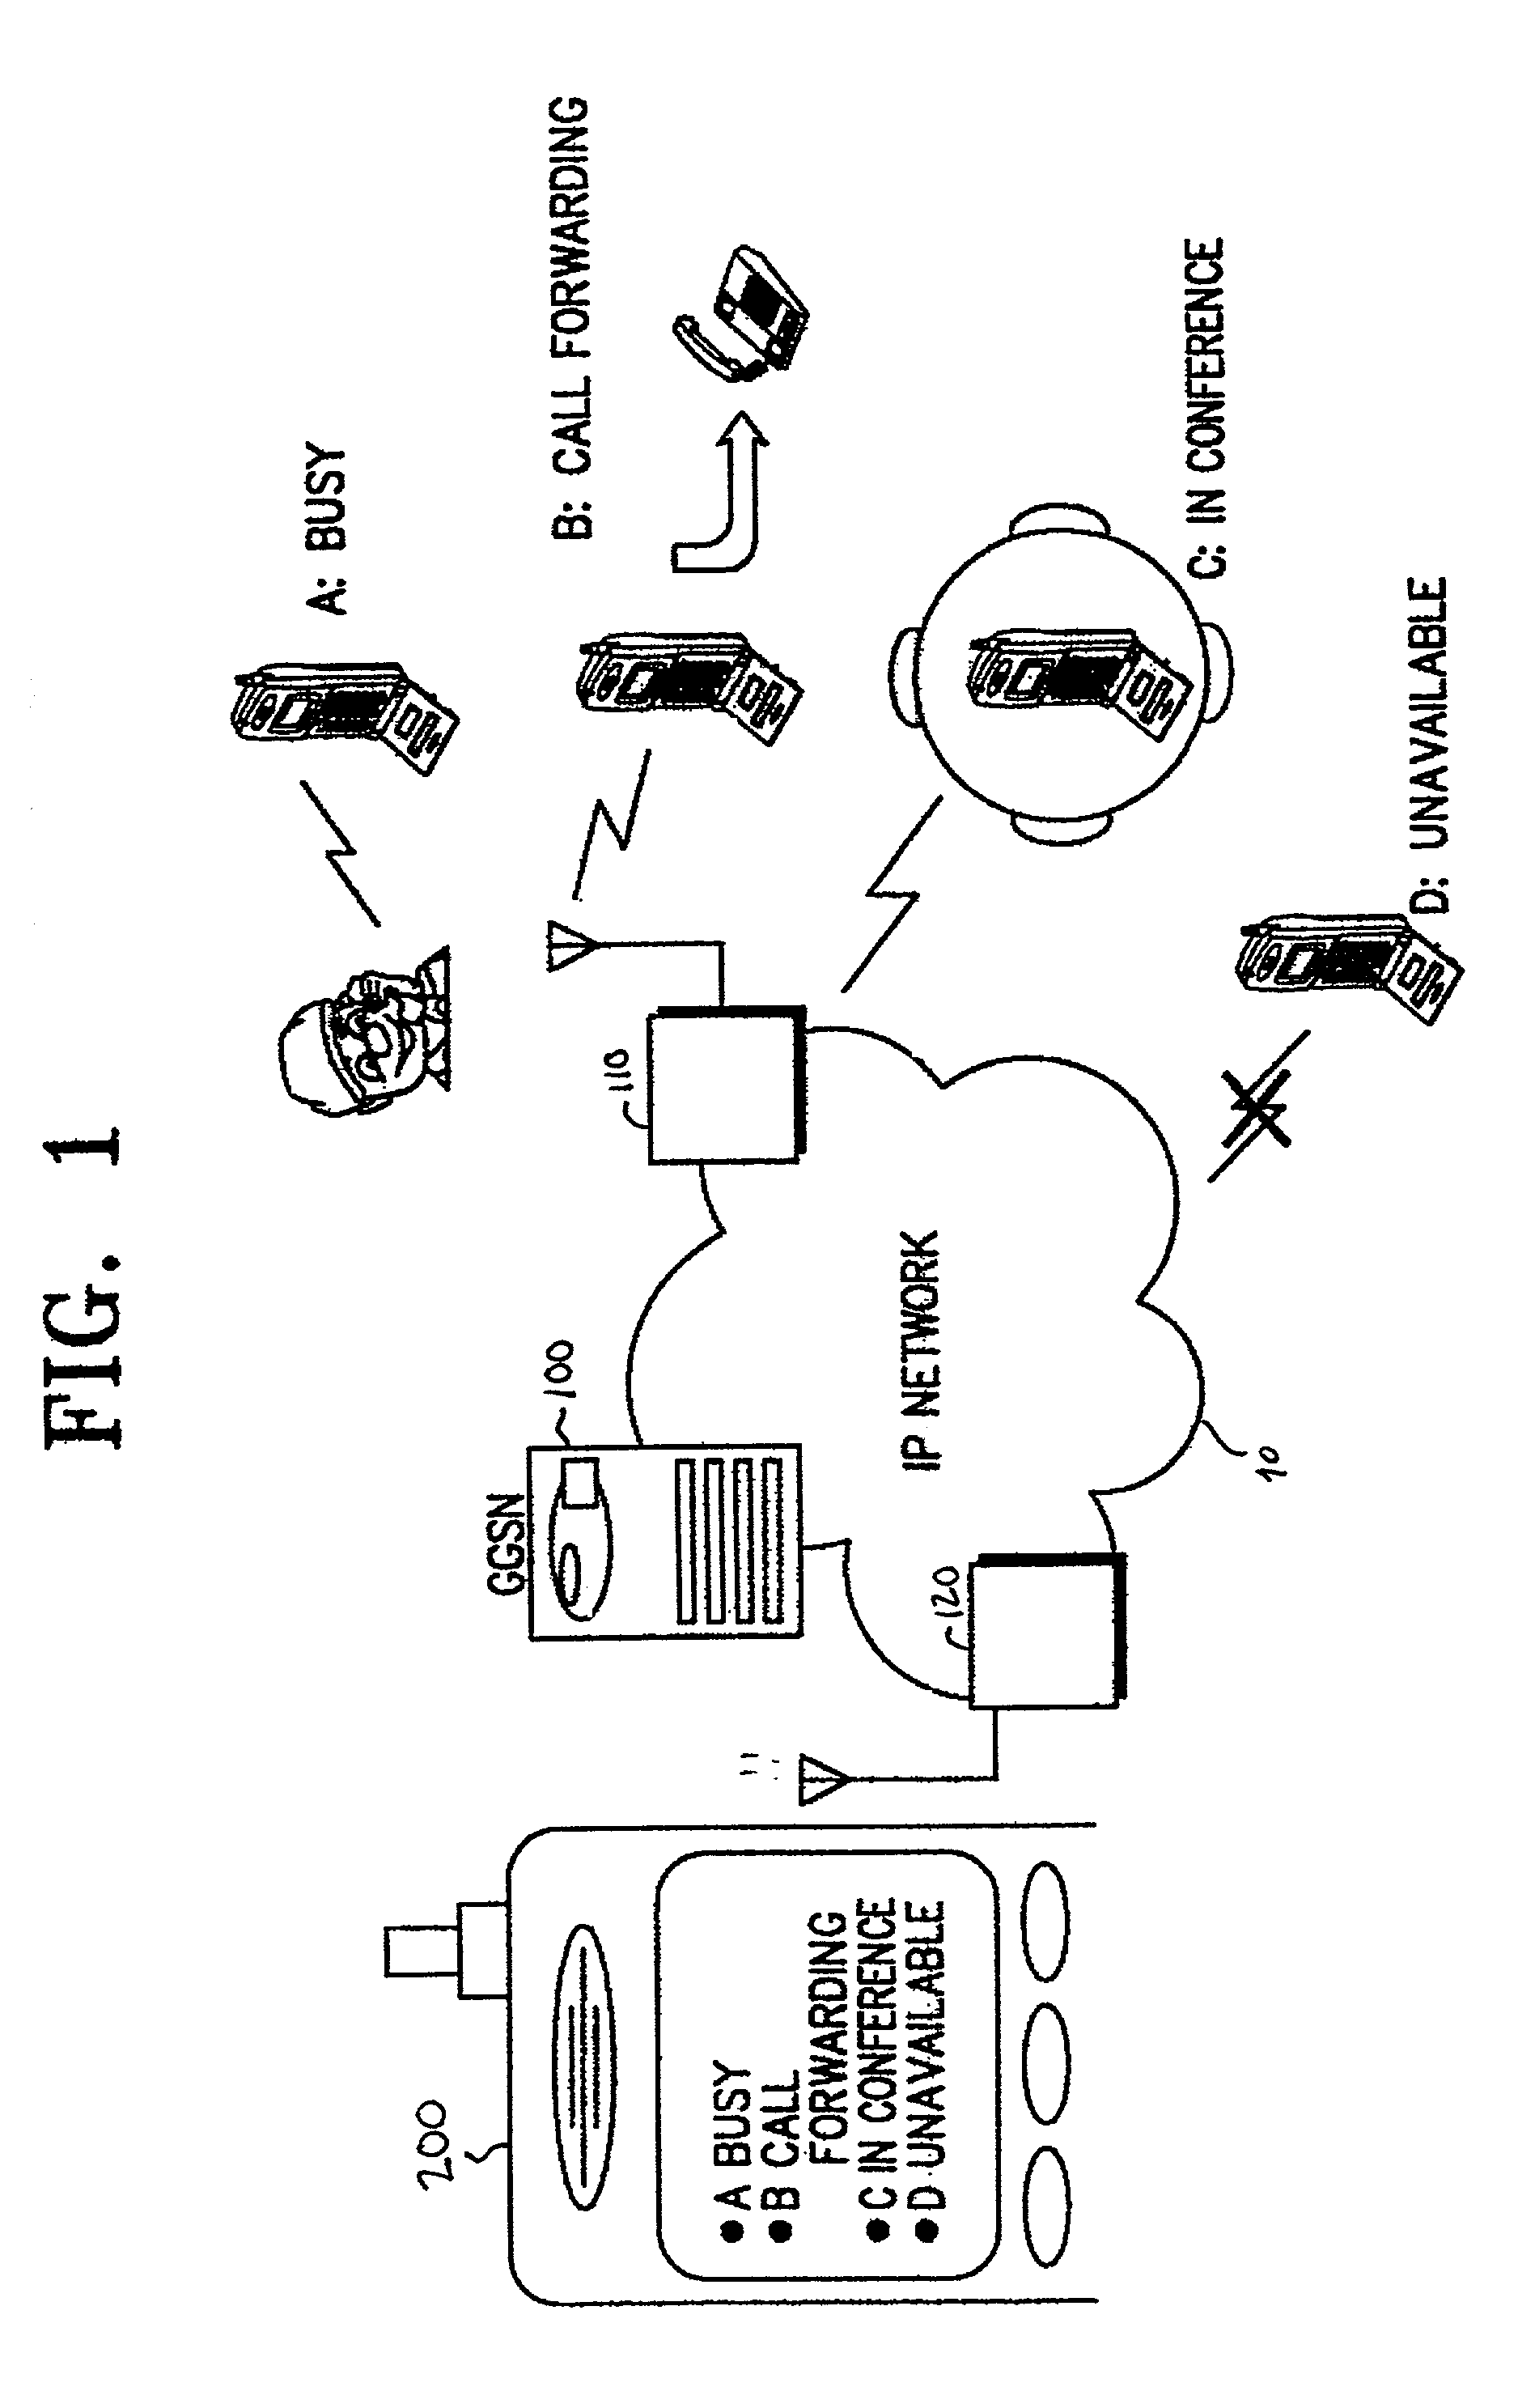 System and method for notifying a user of the status of other mobile terminals